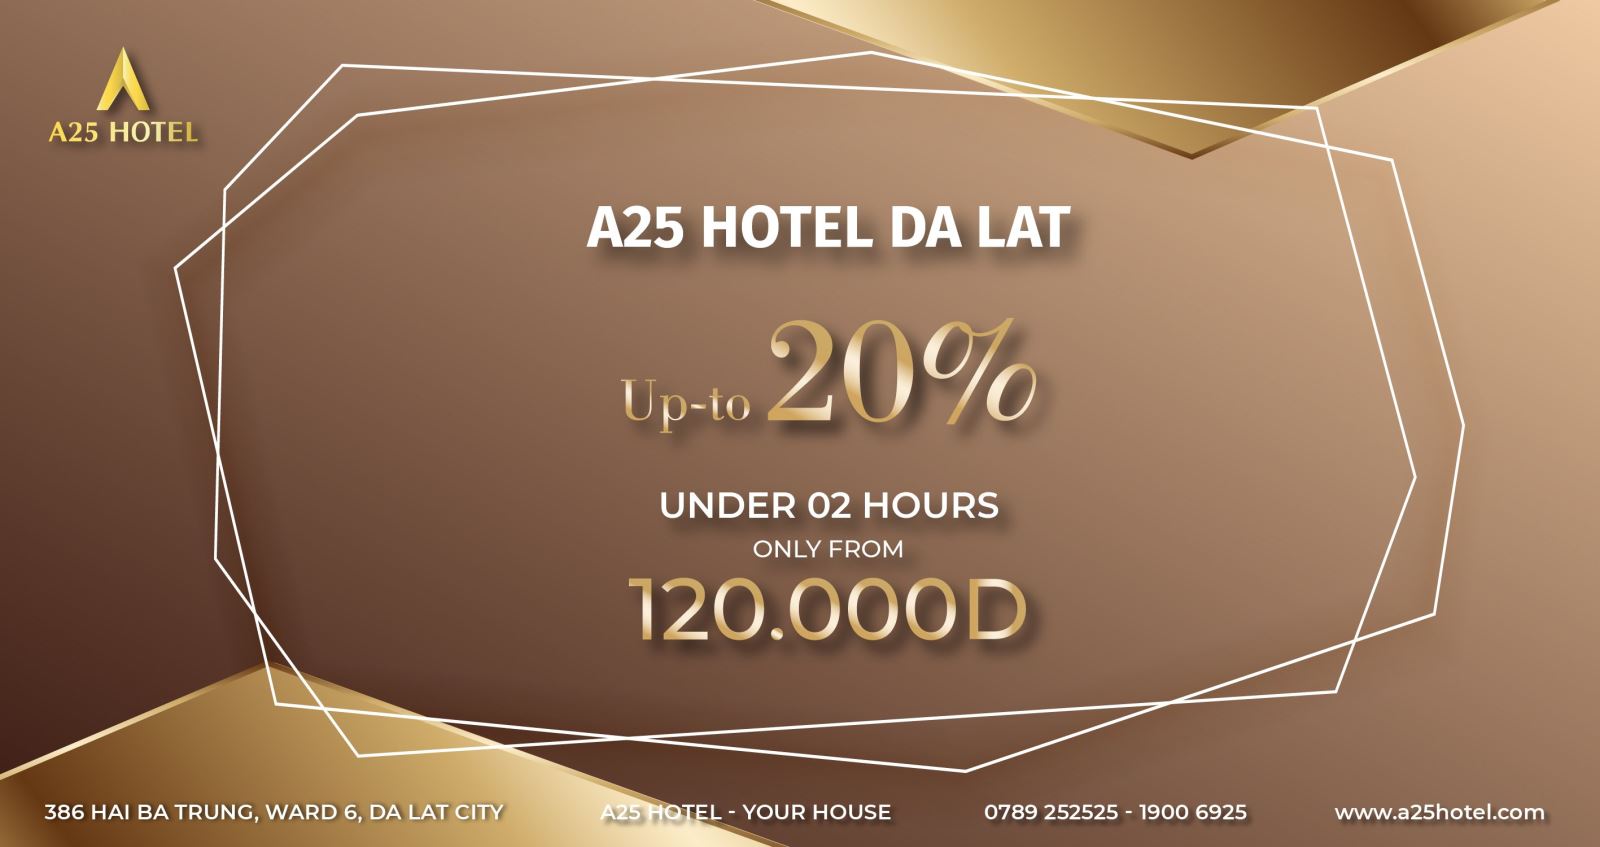 A25 HOTEL DA LAT - PERFECT PLACE FOR YOU VACATION